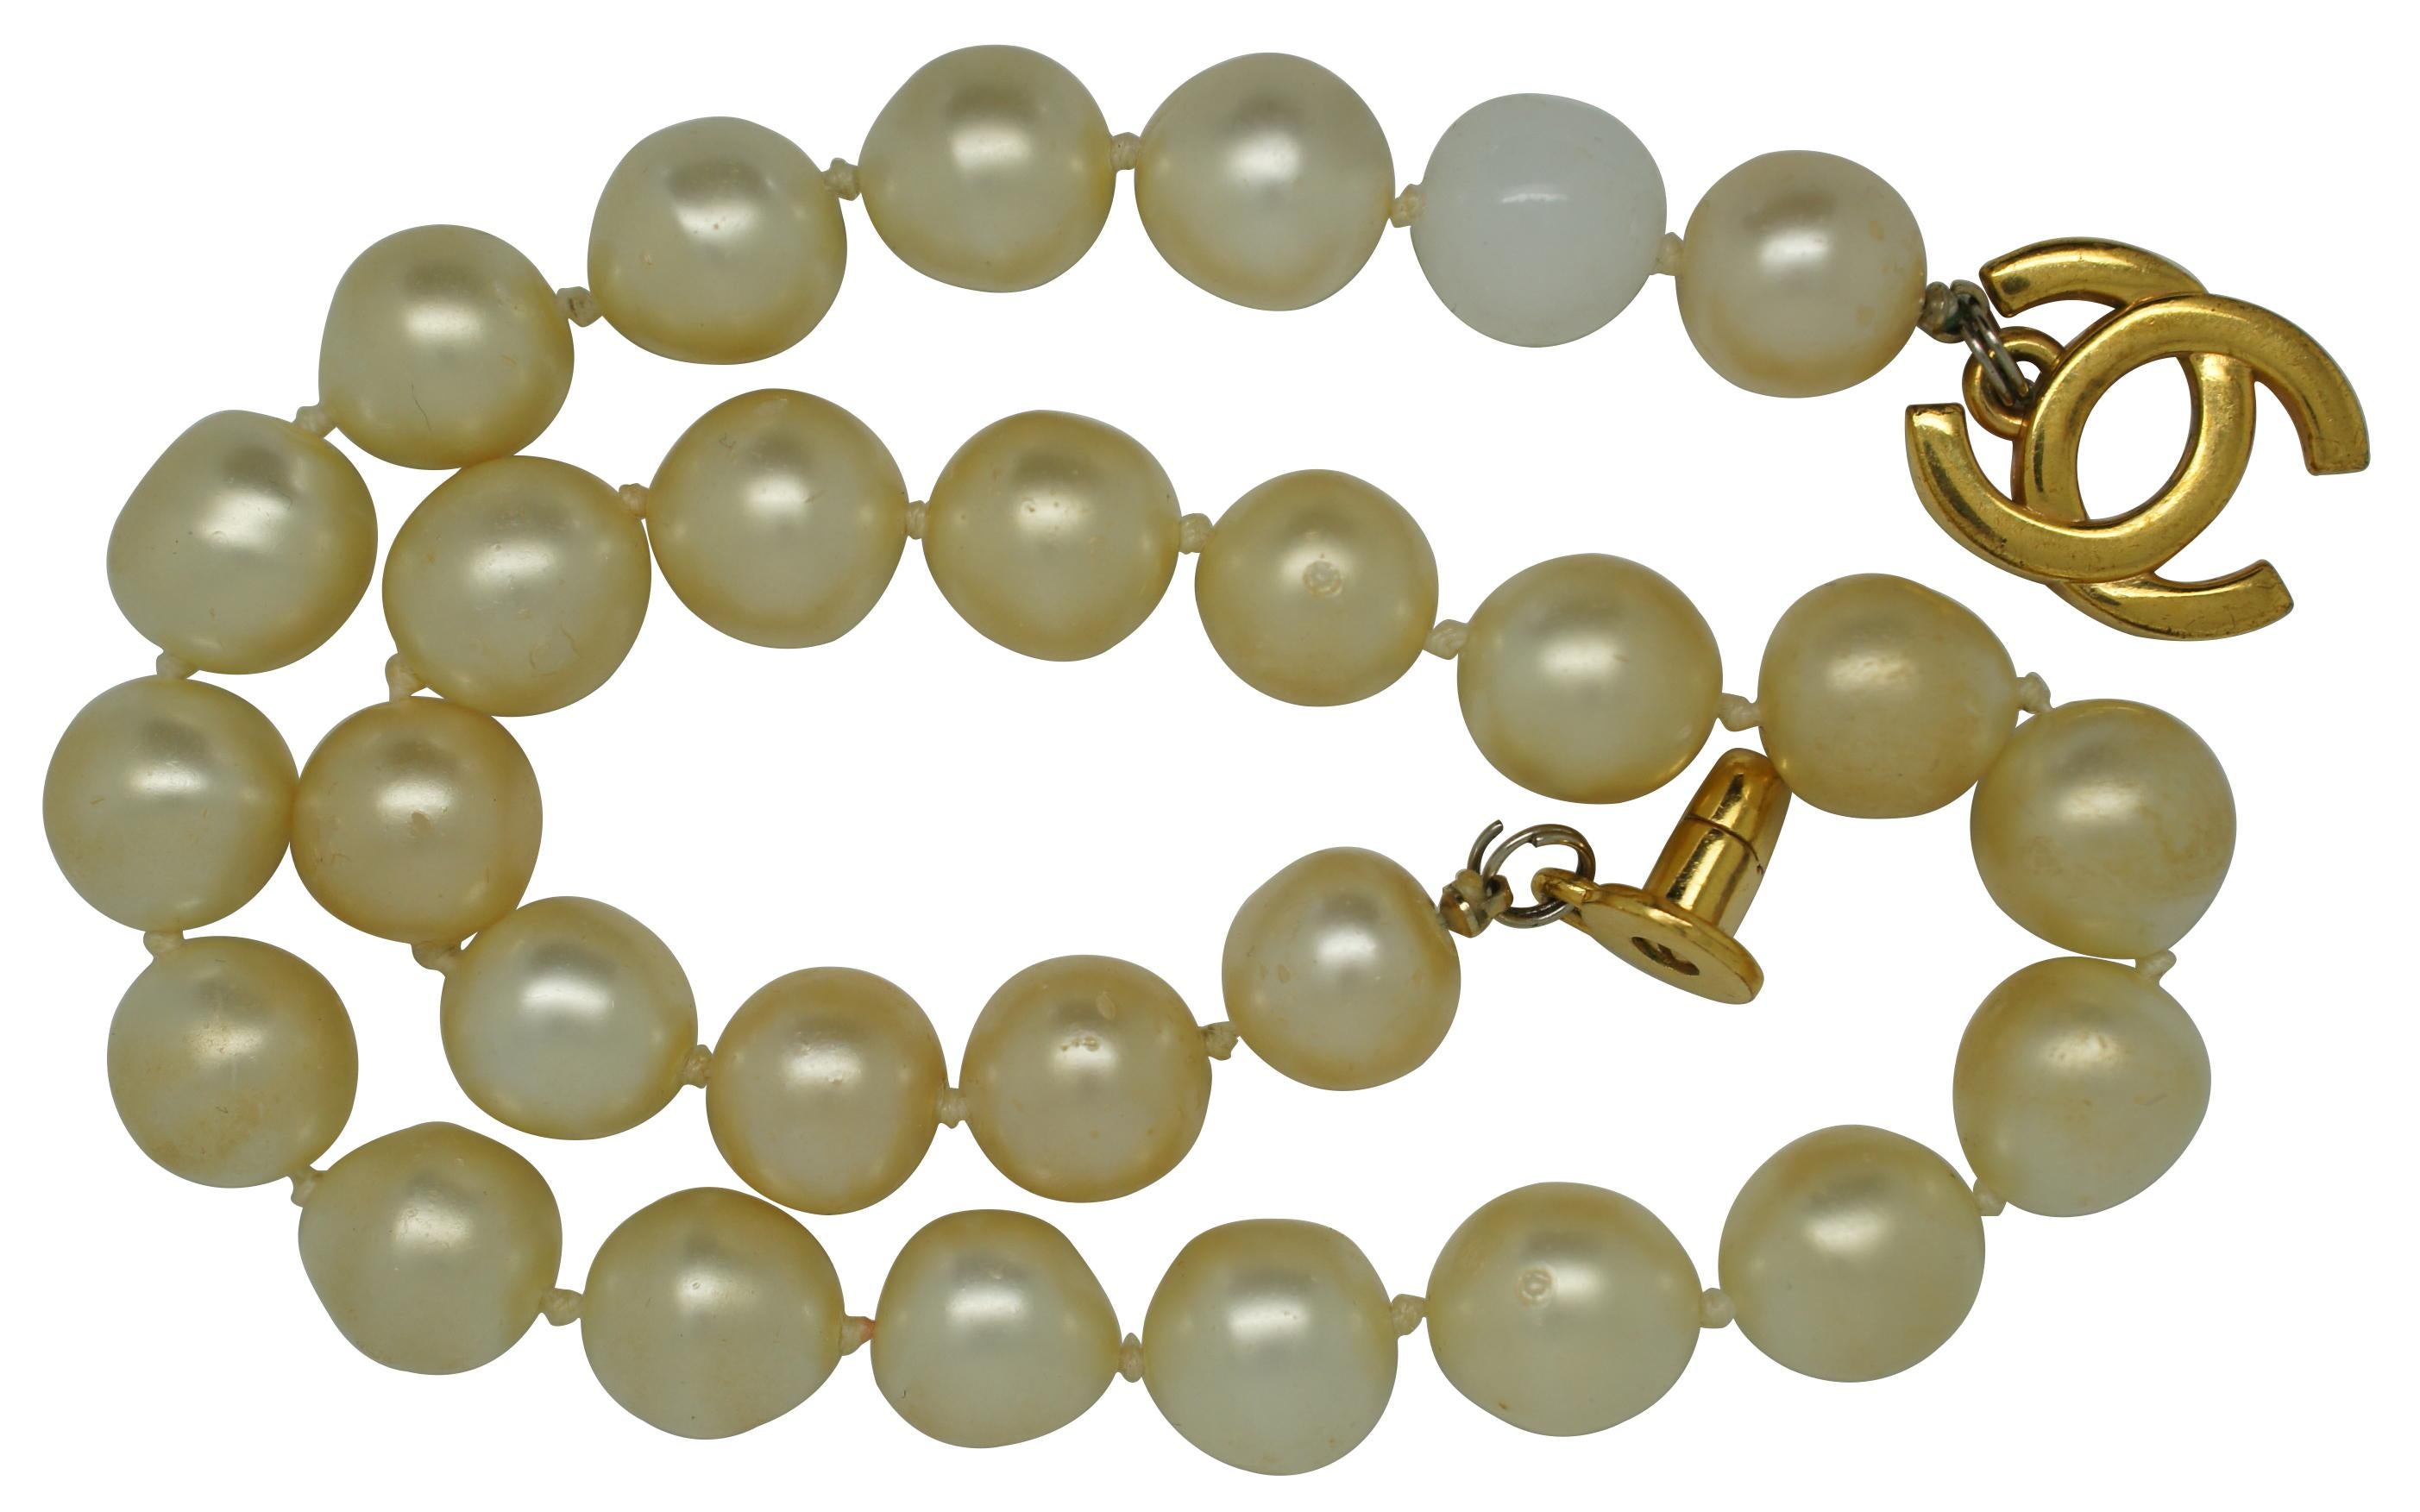 Vintage Chanel France imitation pearl necklace with gold tone interlocking-C clasp. 96P

Provenance: Estate of Carol Levitan and Jesse Philips
Mr. Philips was both a retailer, as an owner of a Dayton department store, and a manufacturer who